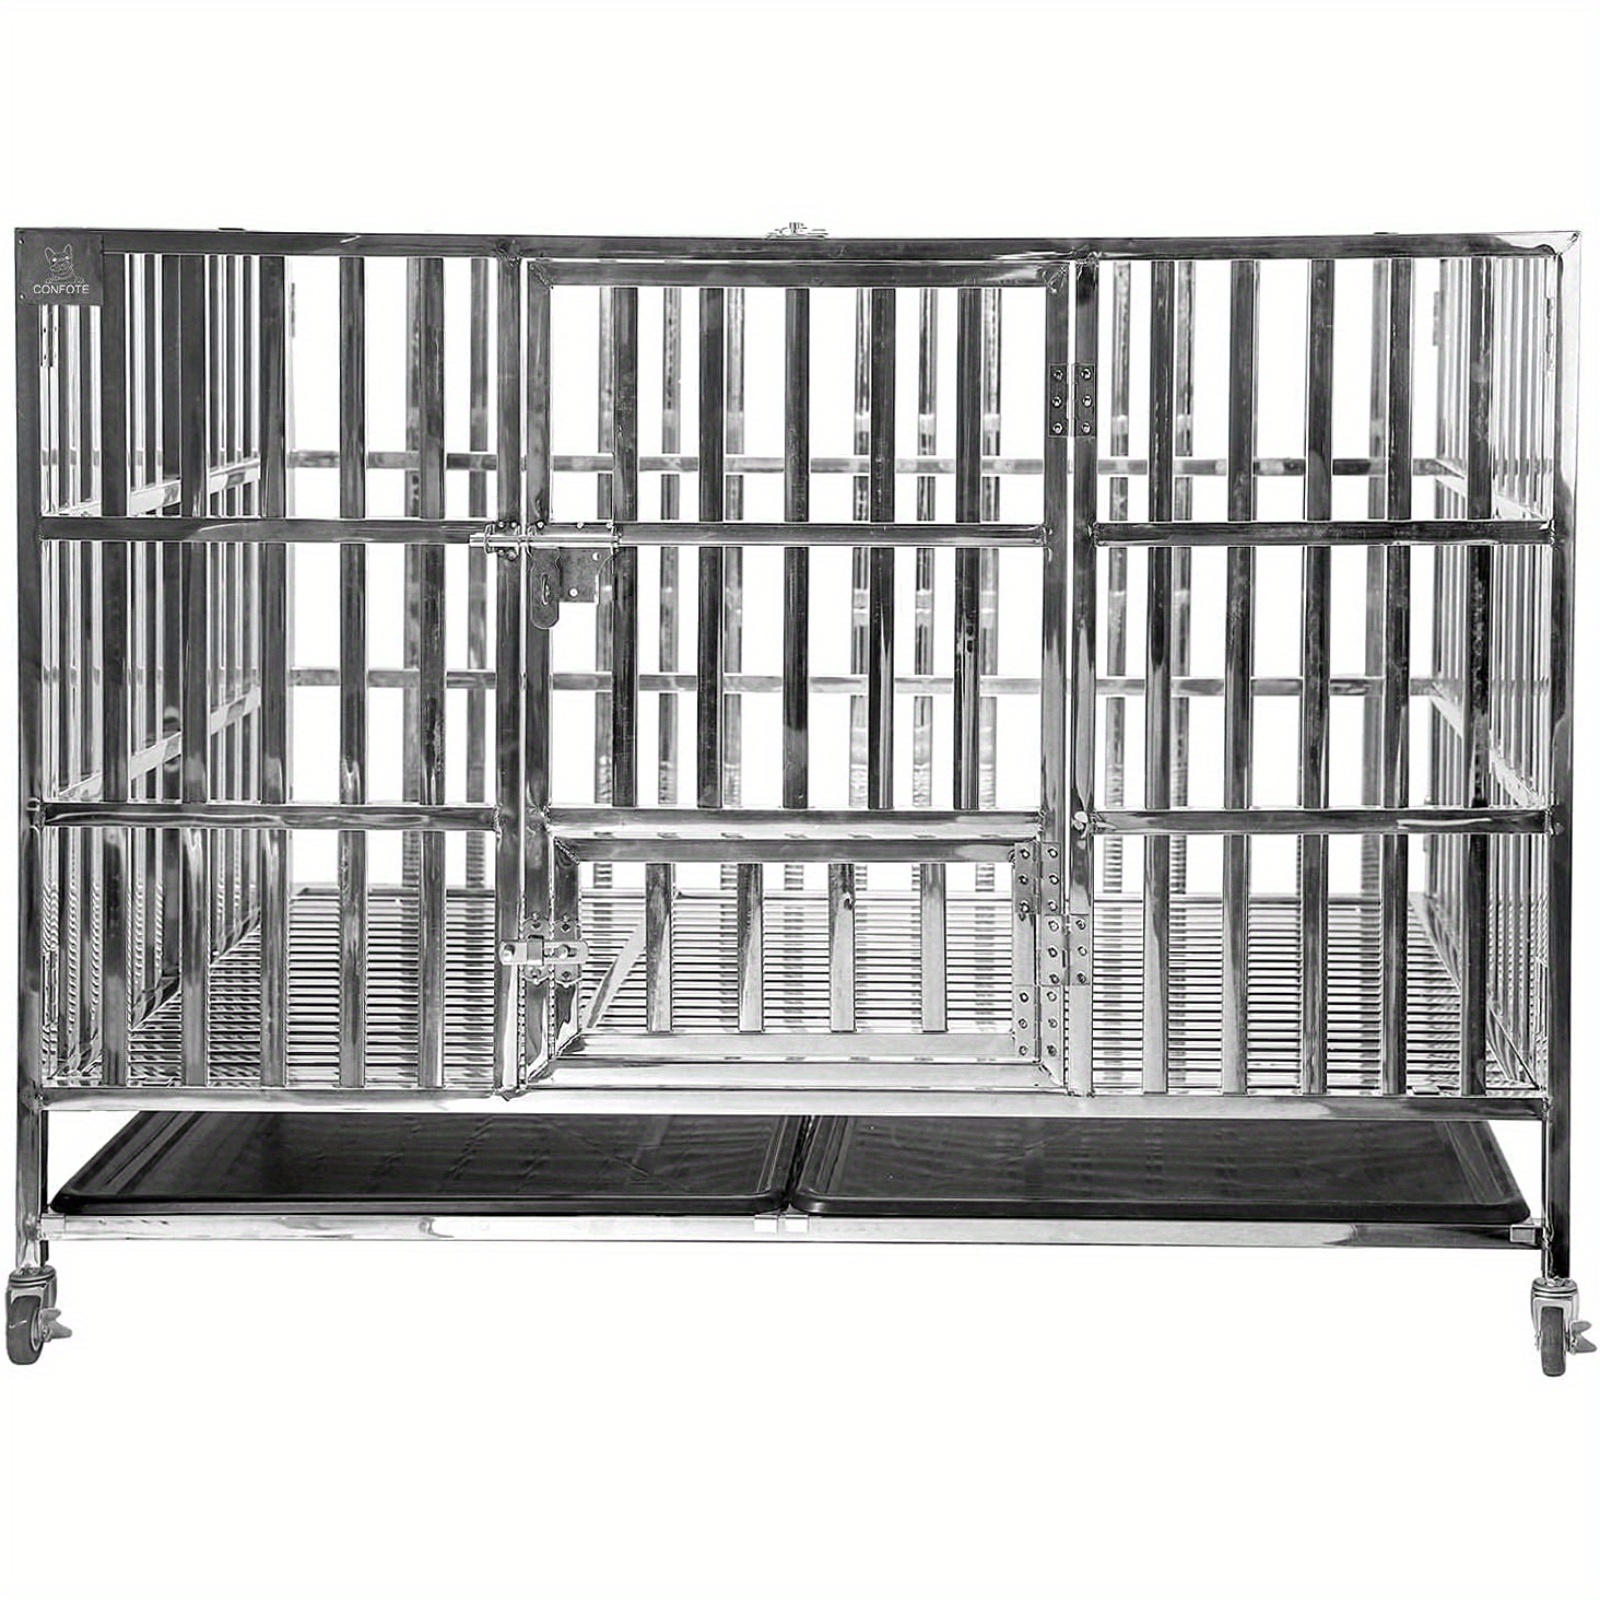 

48 Inch Heavy Duty Stainless Steel Dog Crate Waterproof Pet Cage Kennel For Outdoor Indoor Home